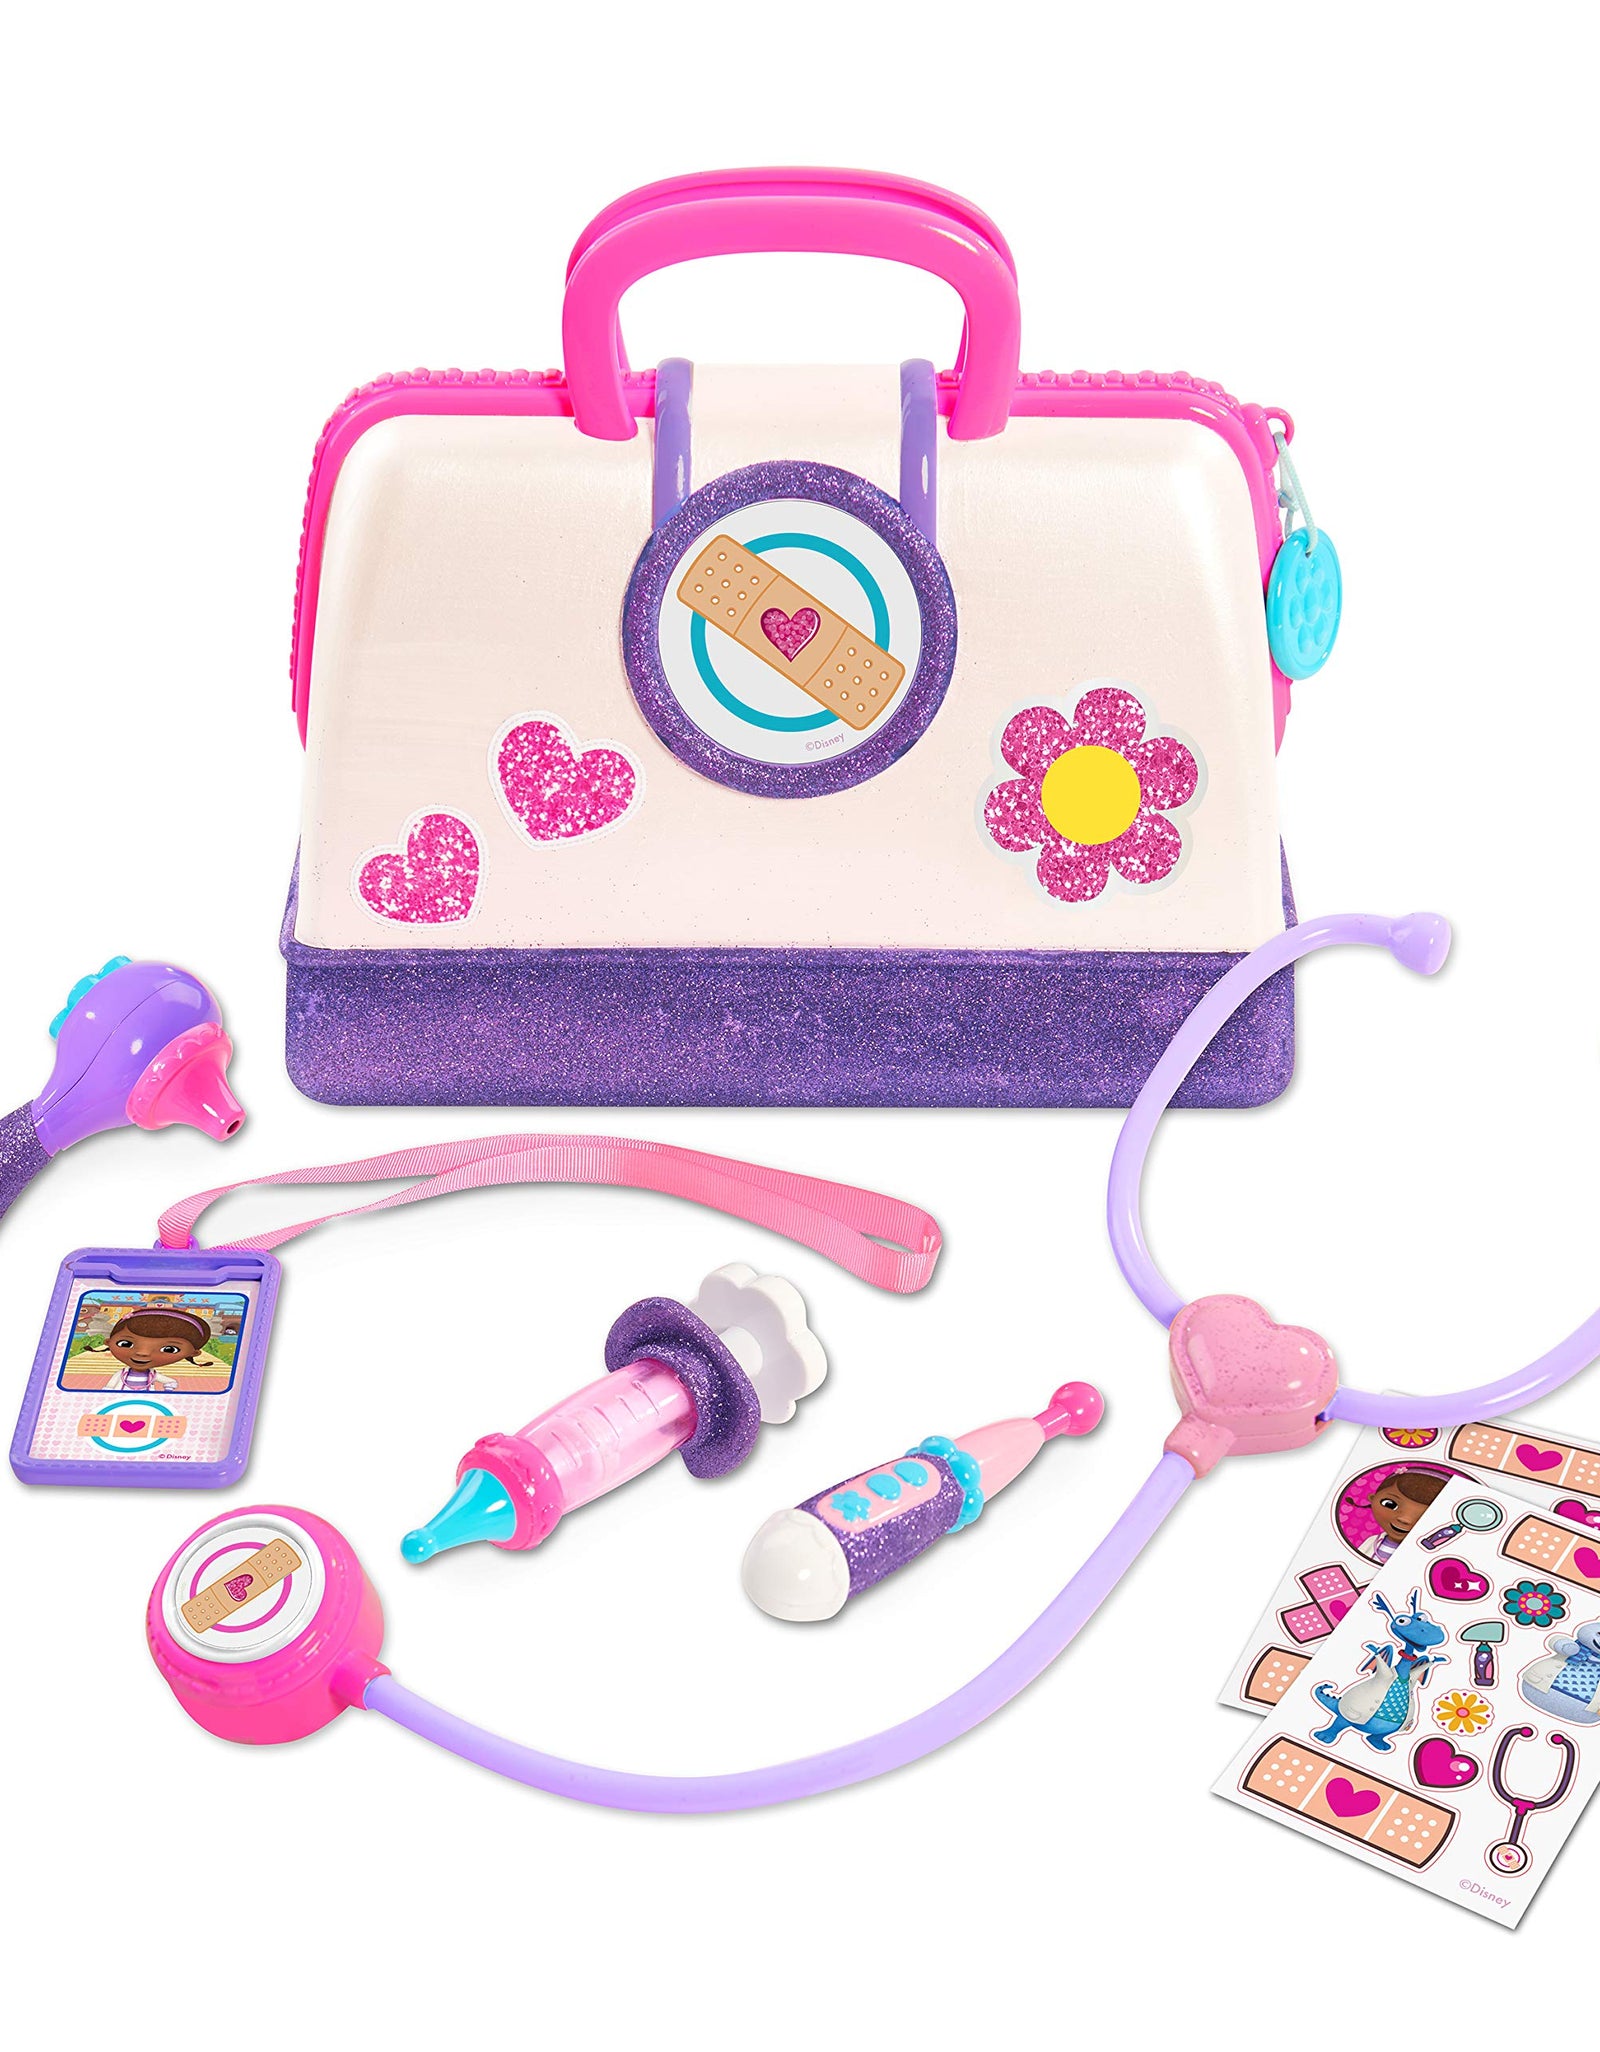 Doc Mcstuffins Toy Hospital Doctor's Bag Set, by Just Play